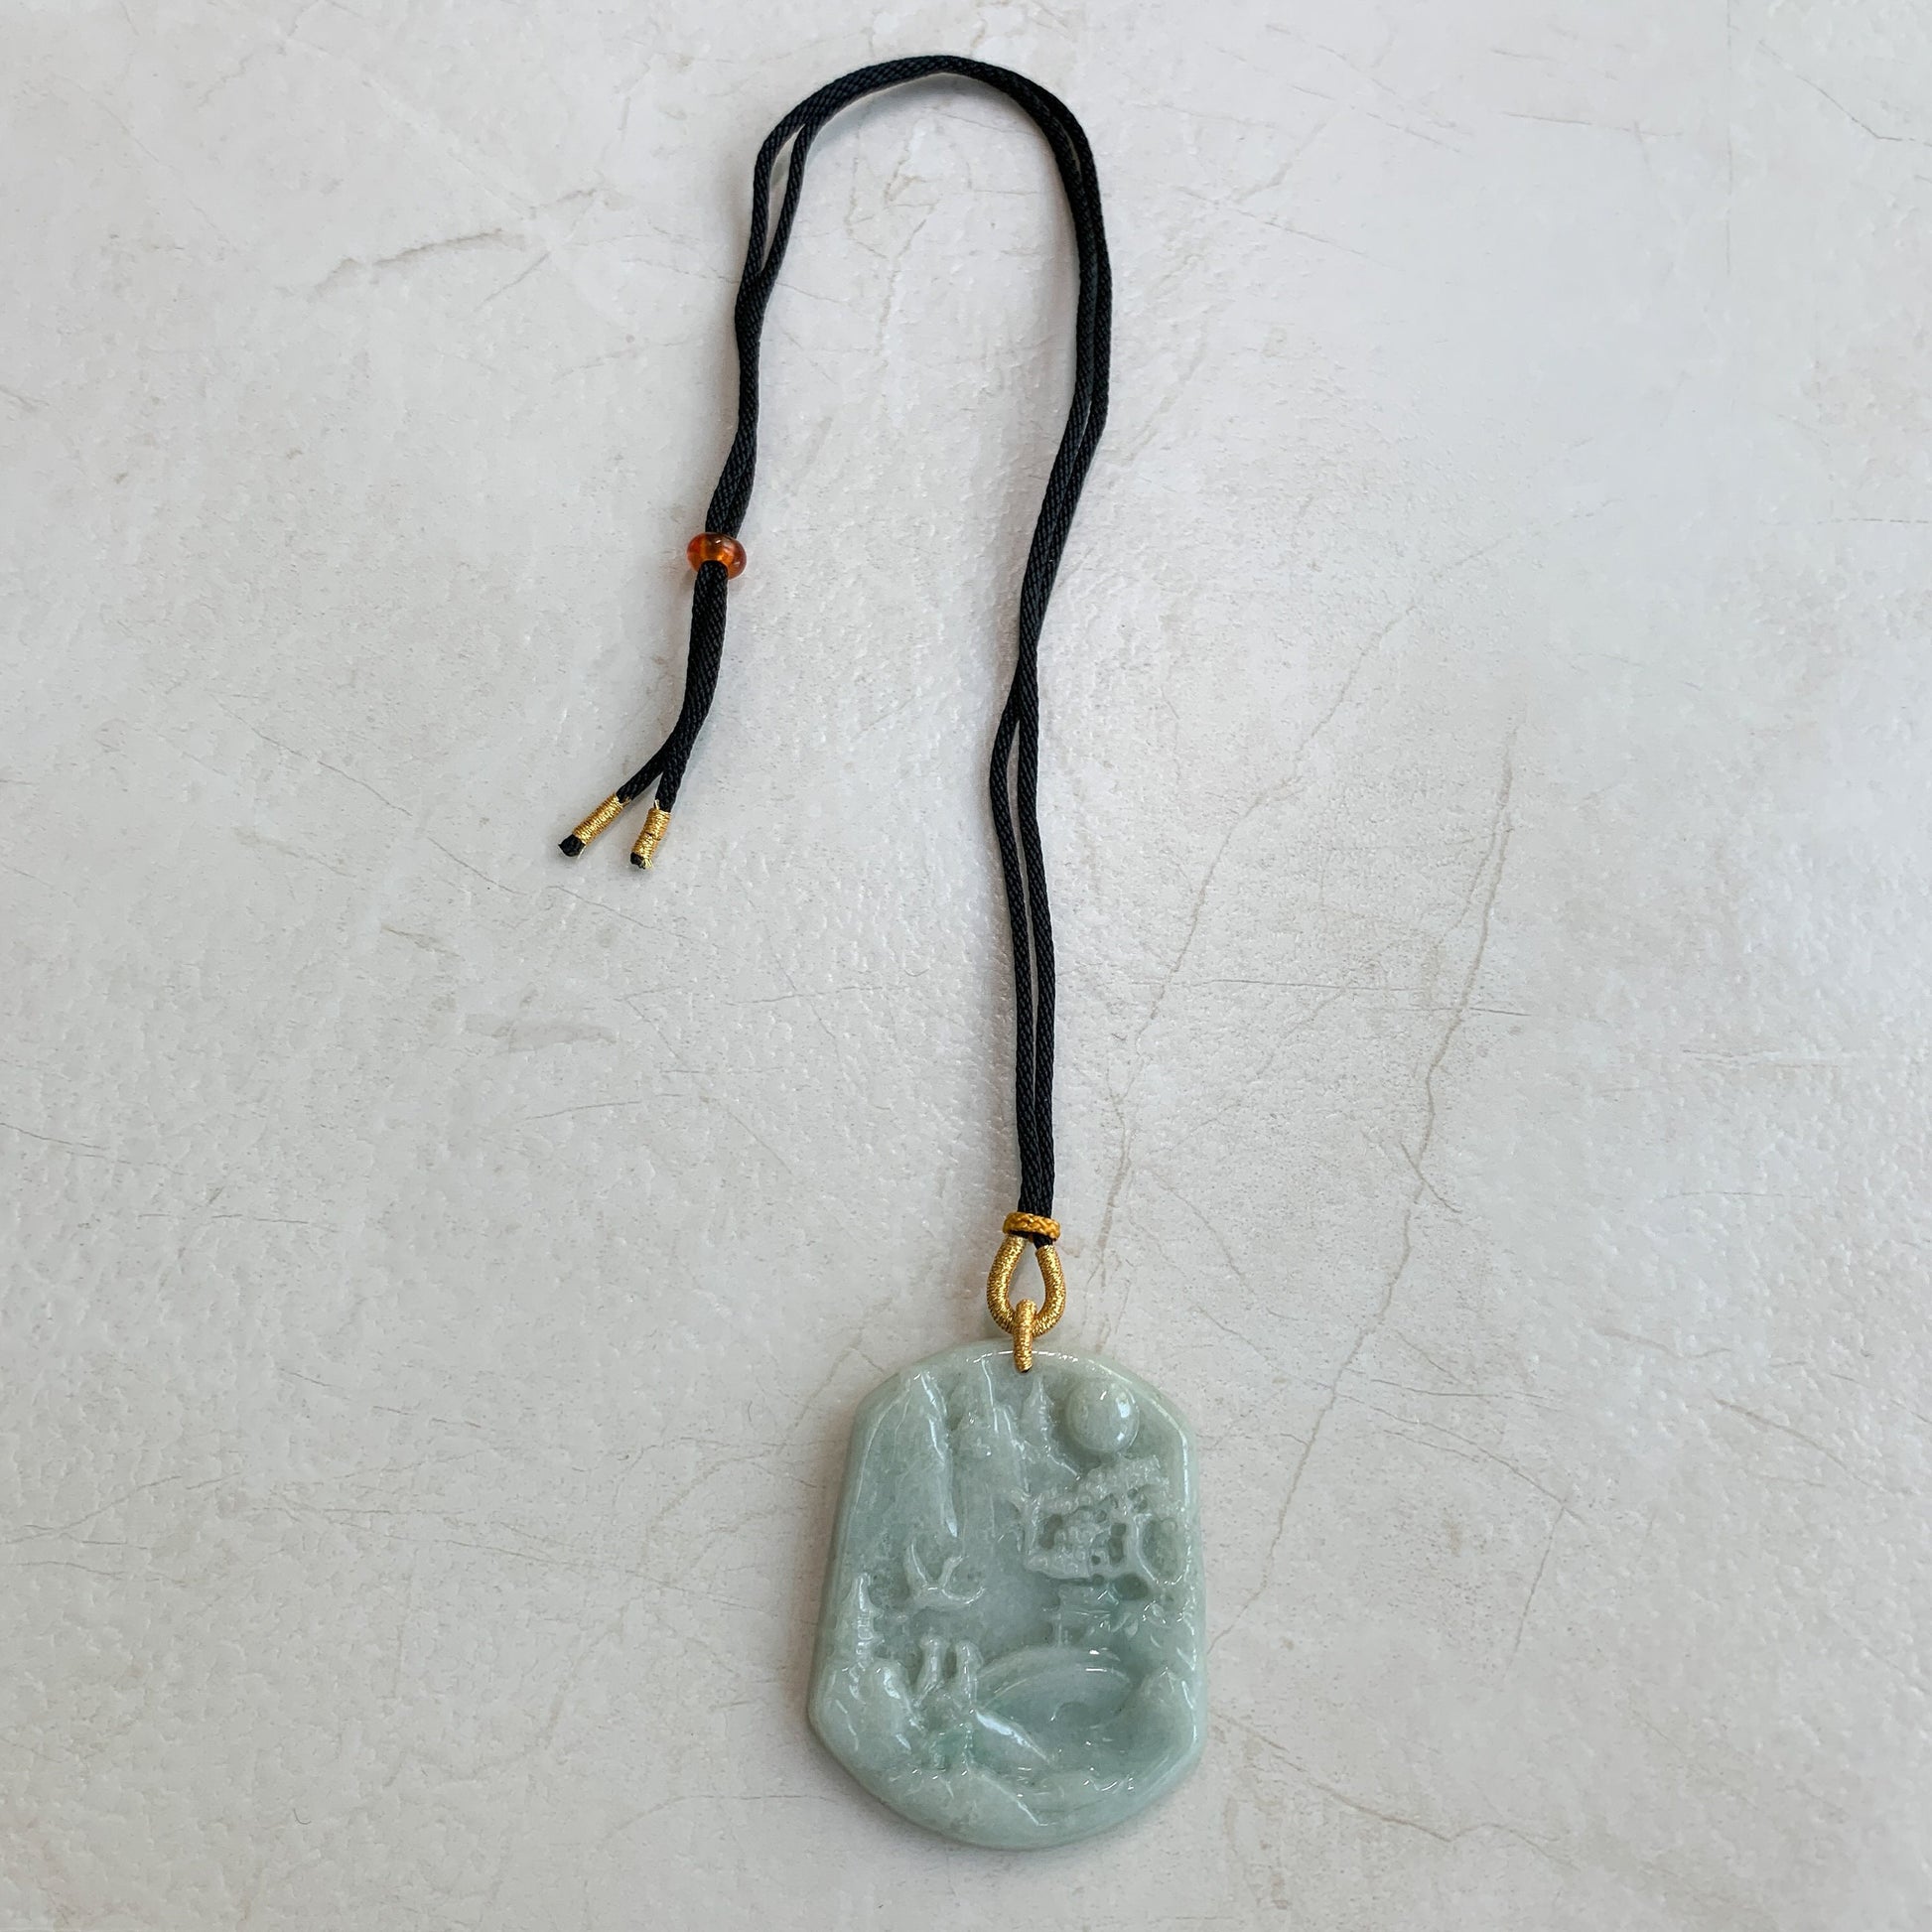 Jadeite Jade Landscape Mountain Forest River Scenery Hand Carved Pendant Necklace, YJ-0321-0437902 - AriaDesignCollection